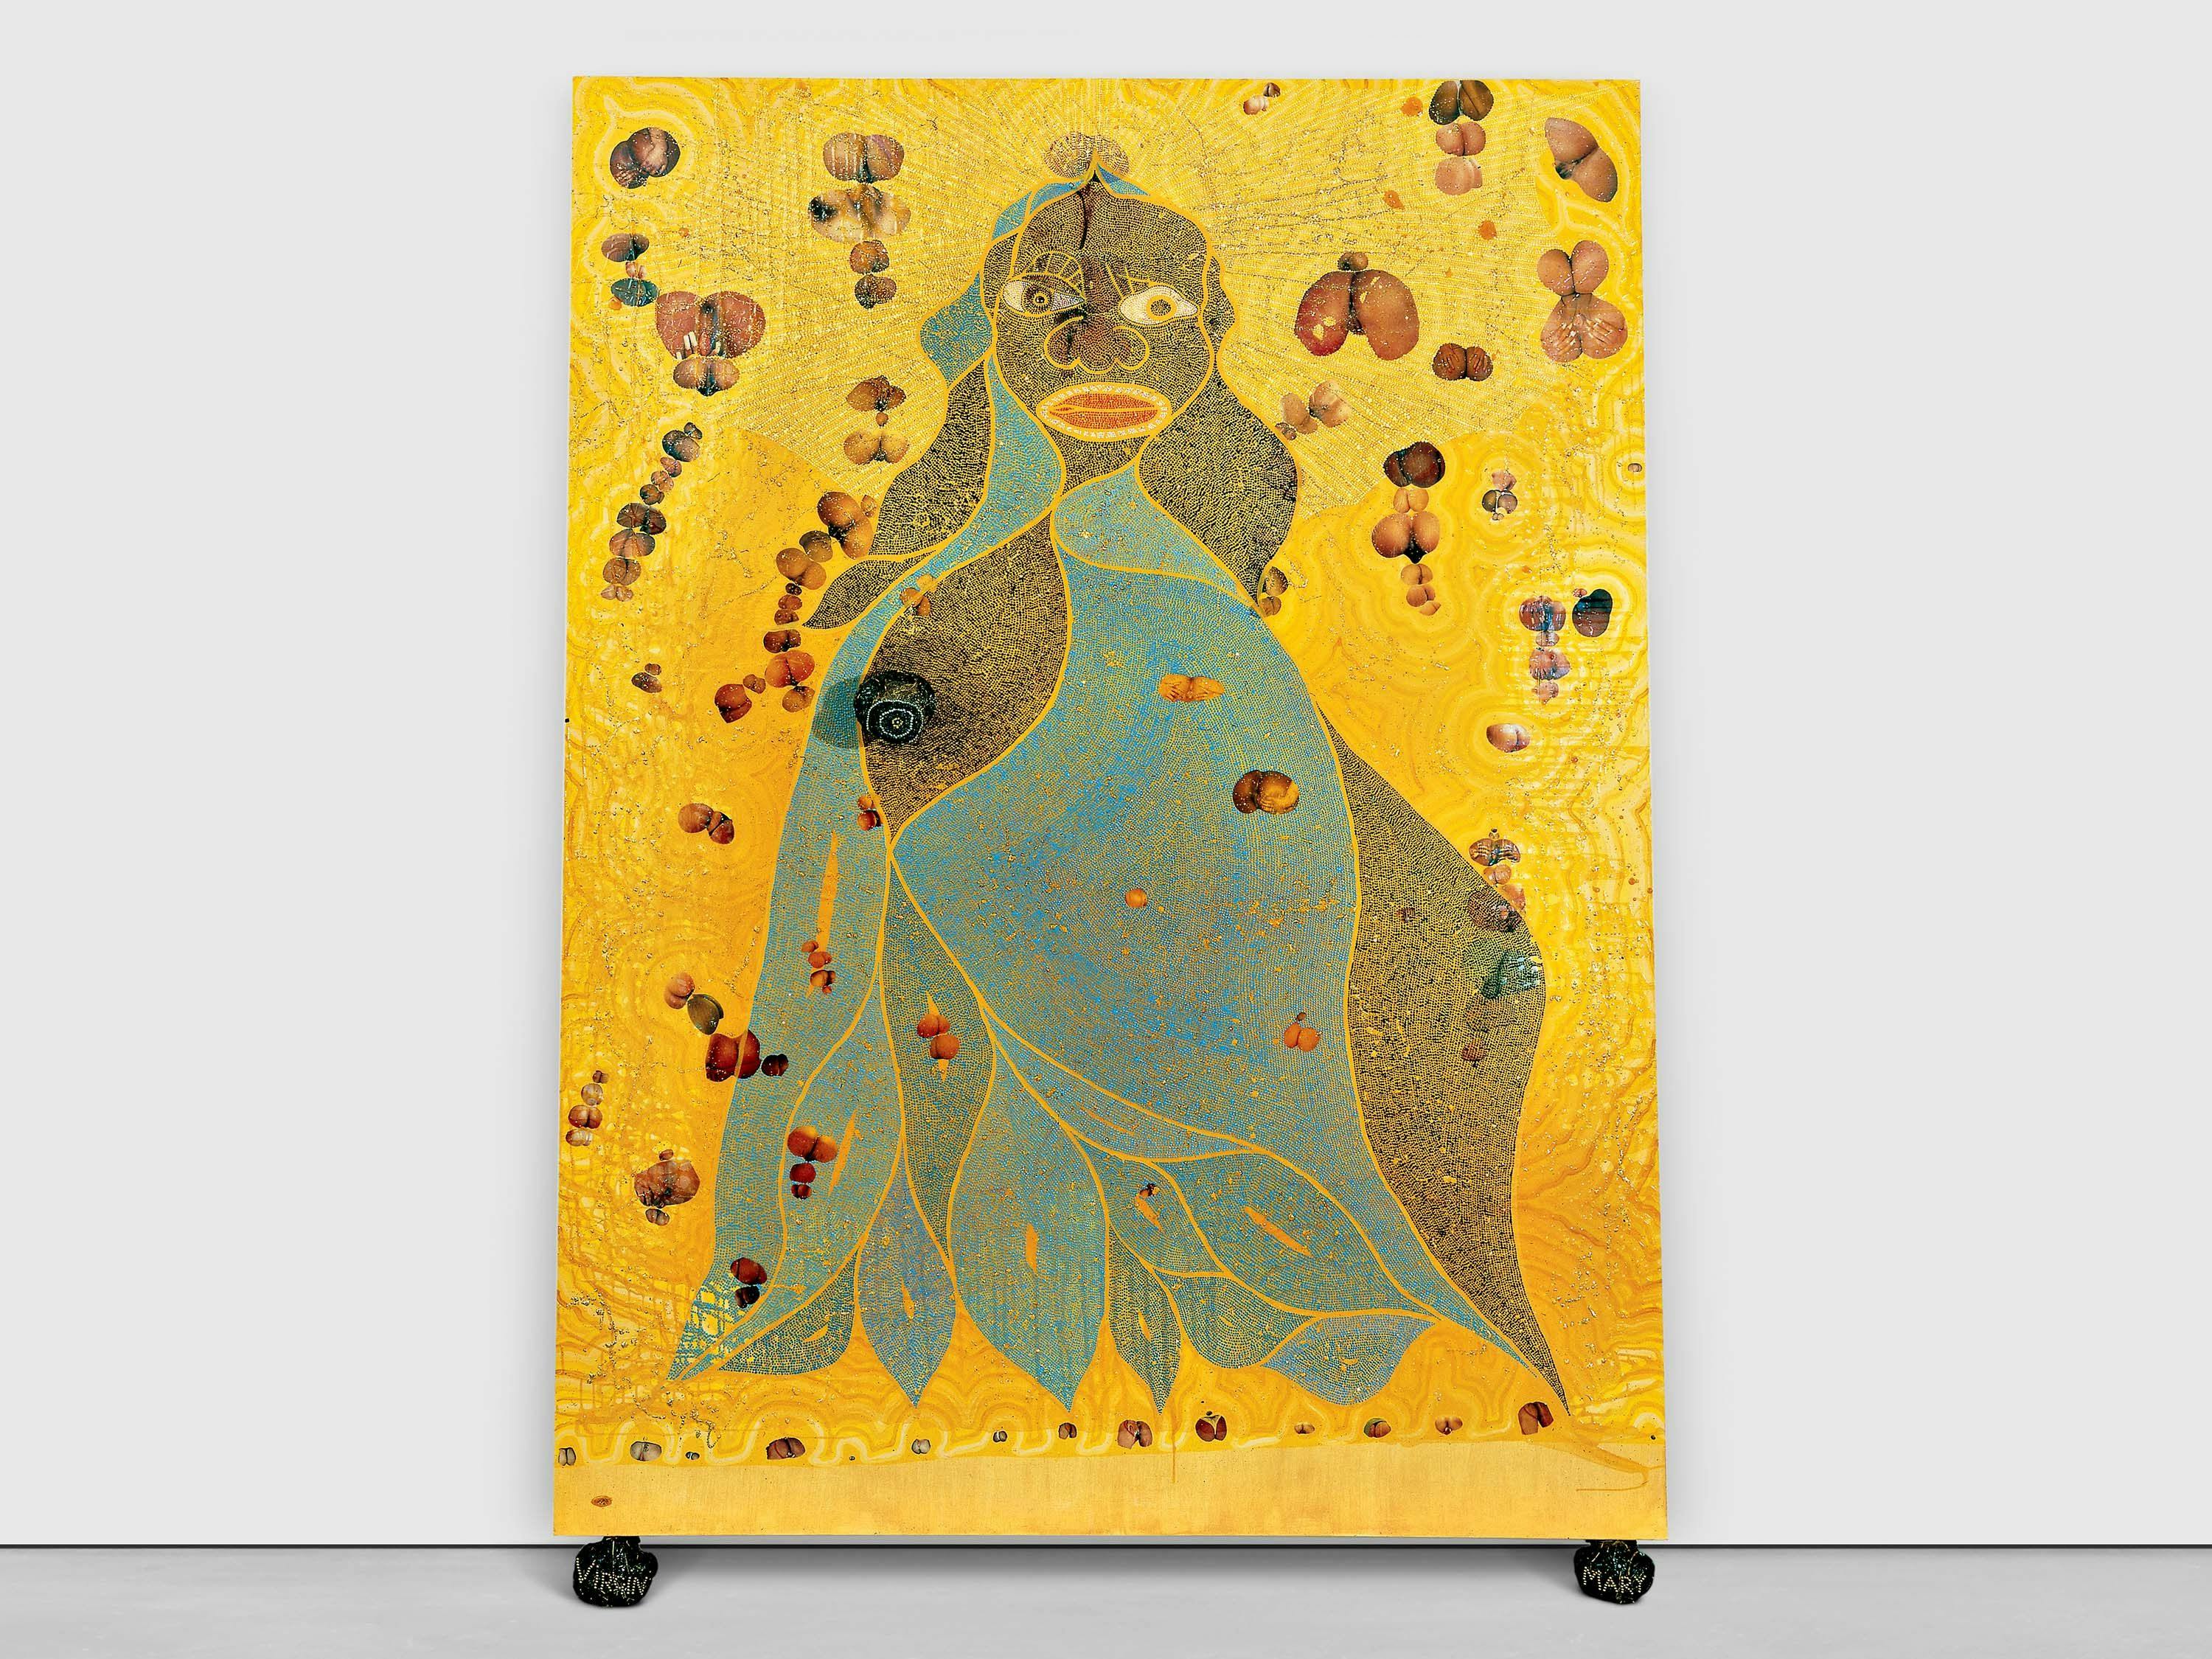 A mixed media artwork by Chris Ofili, titled The Holy Virgin Mary, dated 1996.